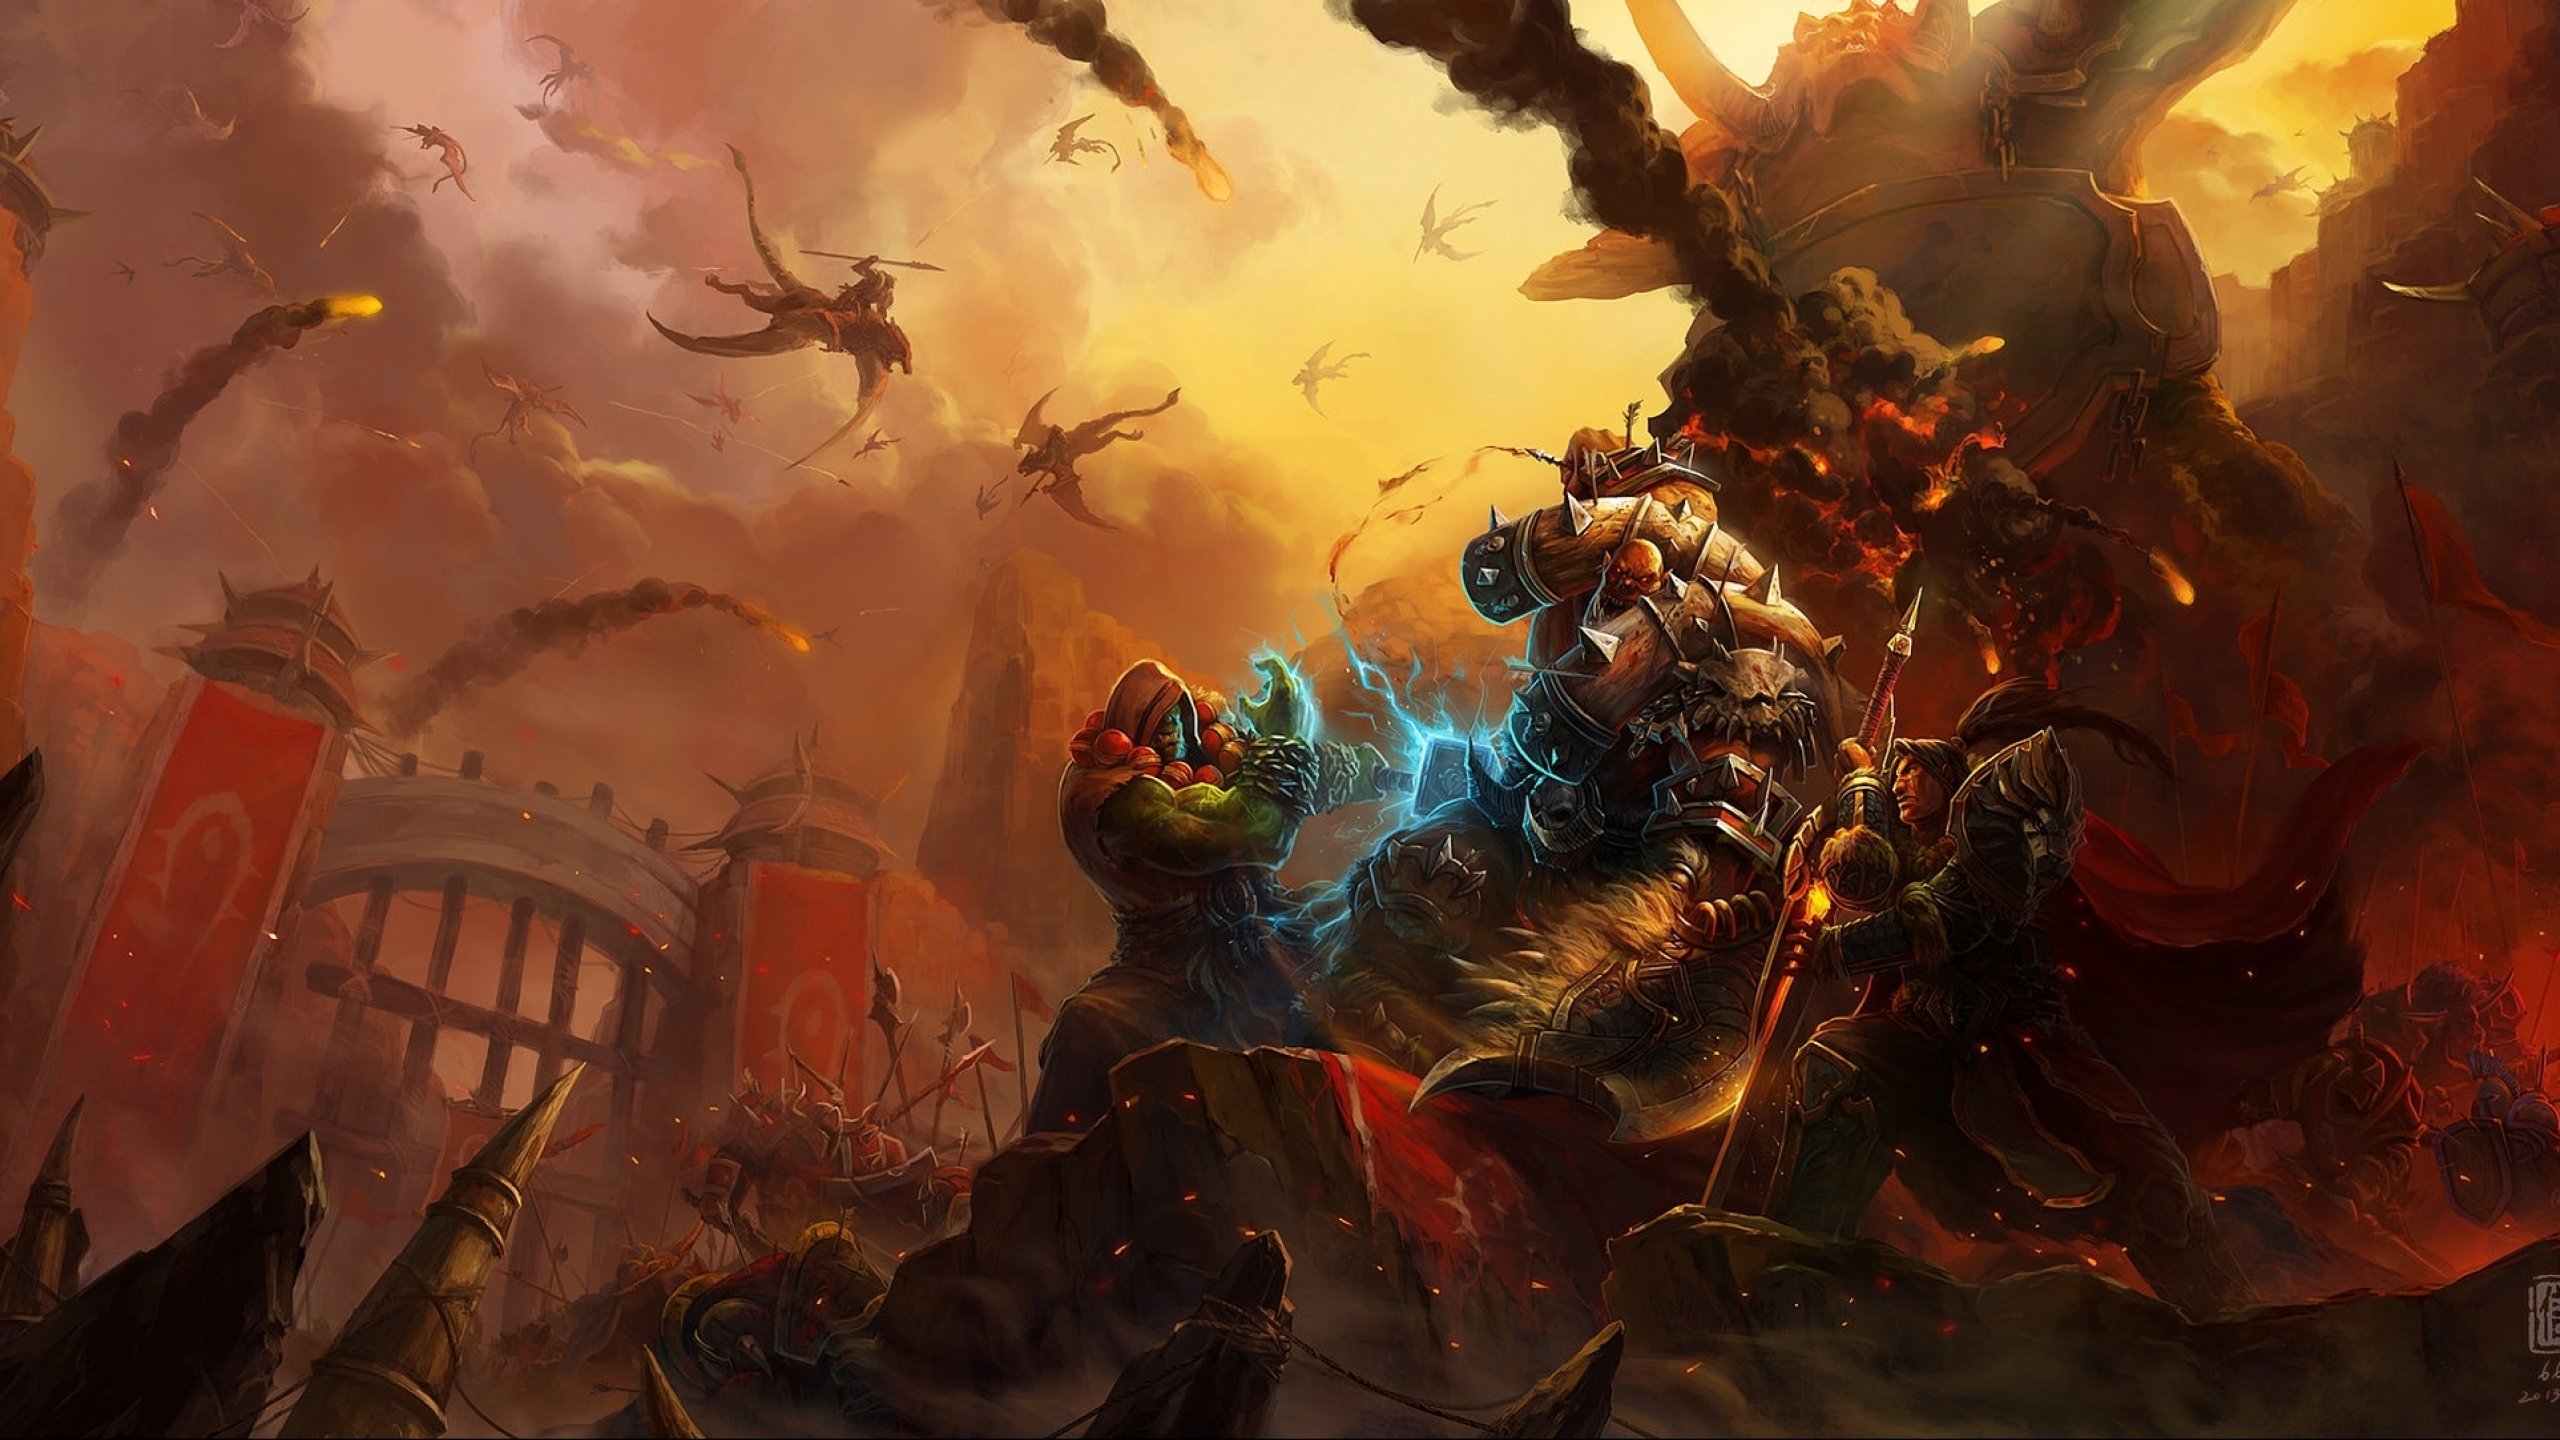 World Of Warcraft Wallpapers